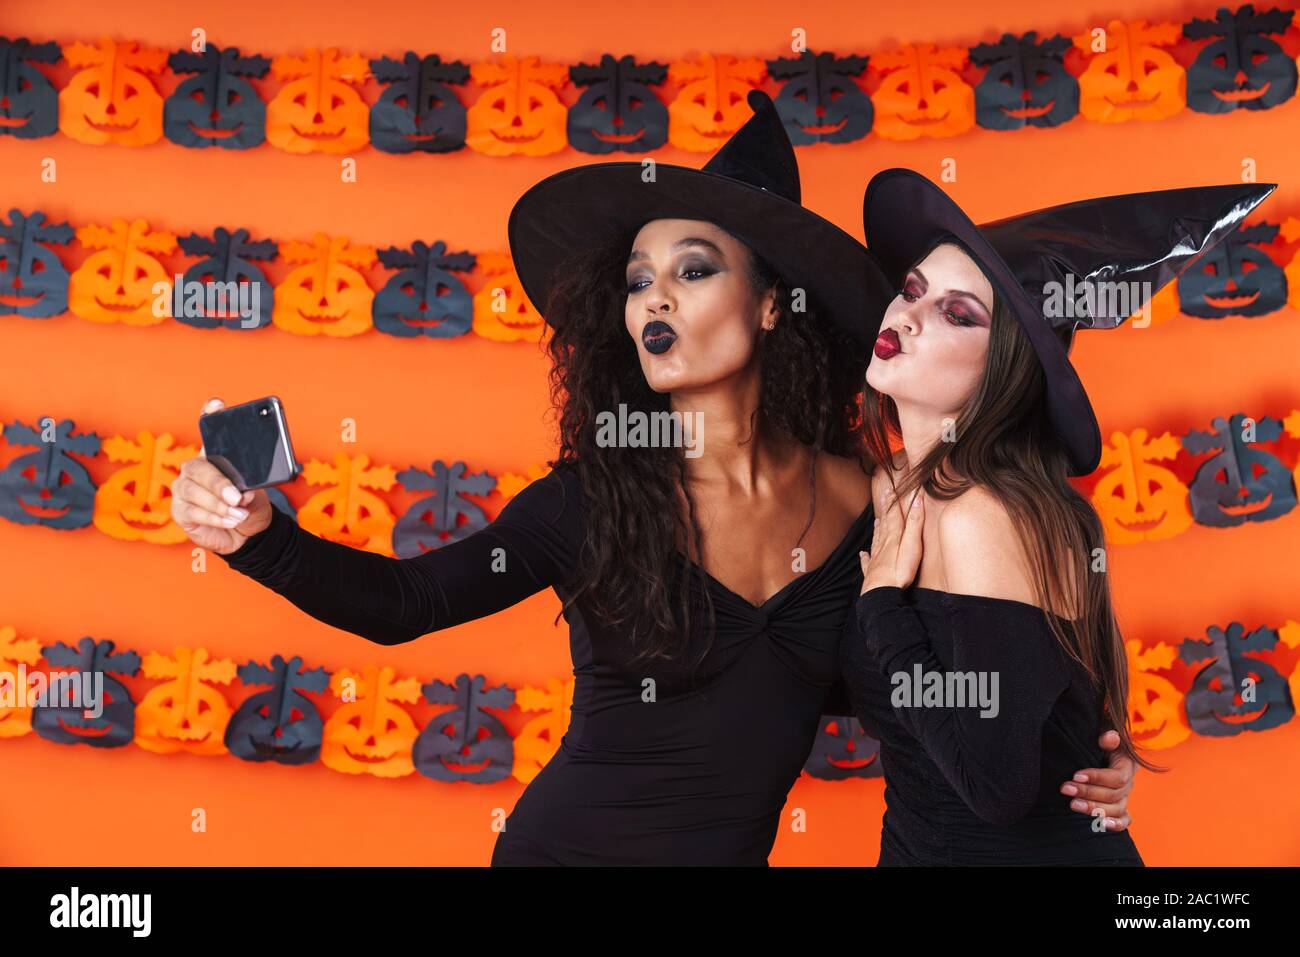 Image of cute witch women in black halloween costume taking selfie photo on cellphone with kissing isolated over orange pumpkin wall Stock Photo